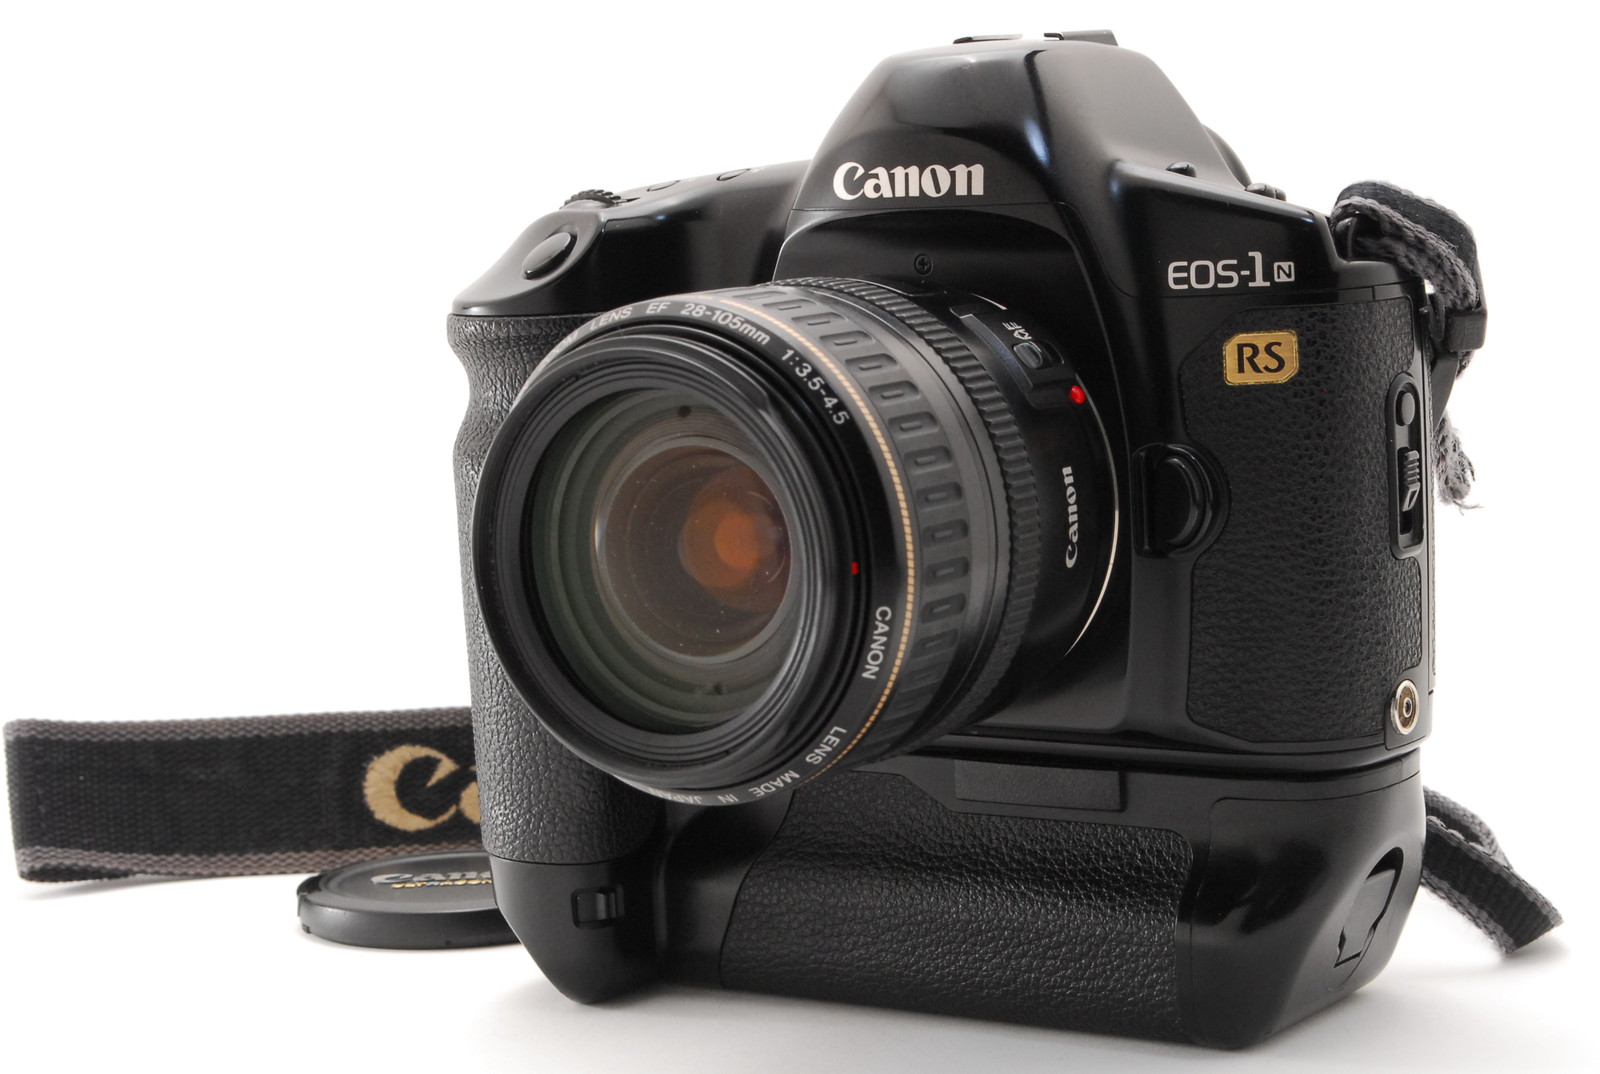 PROMOTION.EXC+++++ Canon EOS-1N RS, EF 28-105mm f/3.5-4.5, Strap, Front Cap from Japan